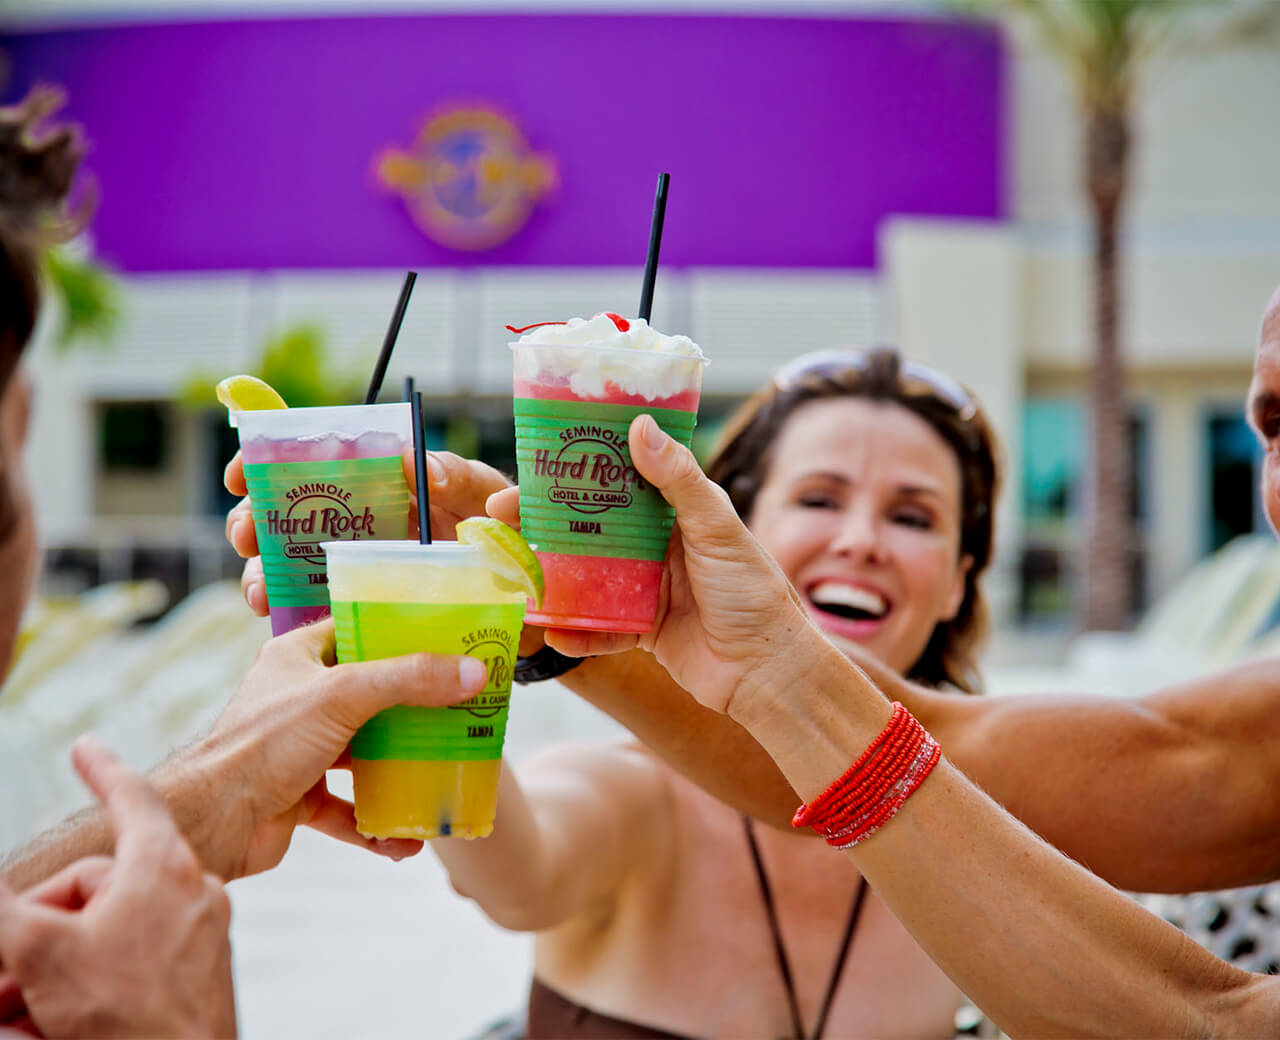 A group of people in an outdoor setting clinking their Hard Rock Hotel & Casino branded drinks